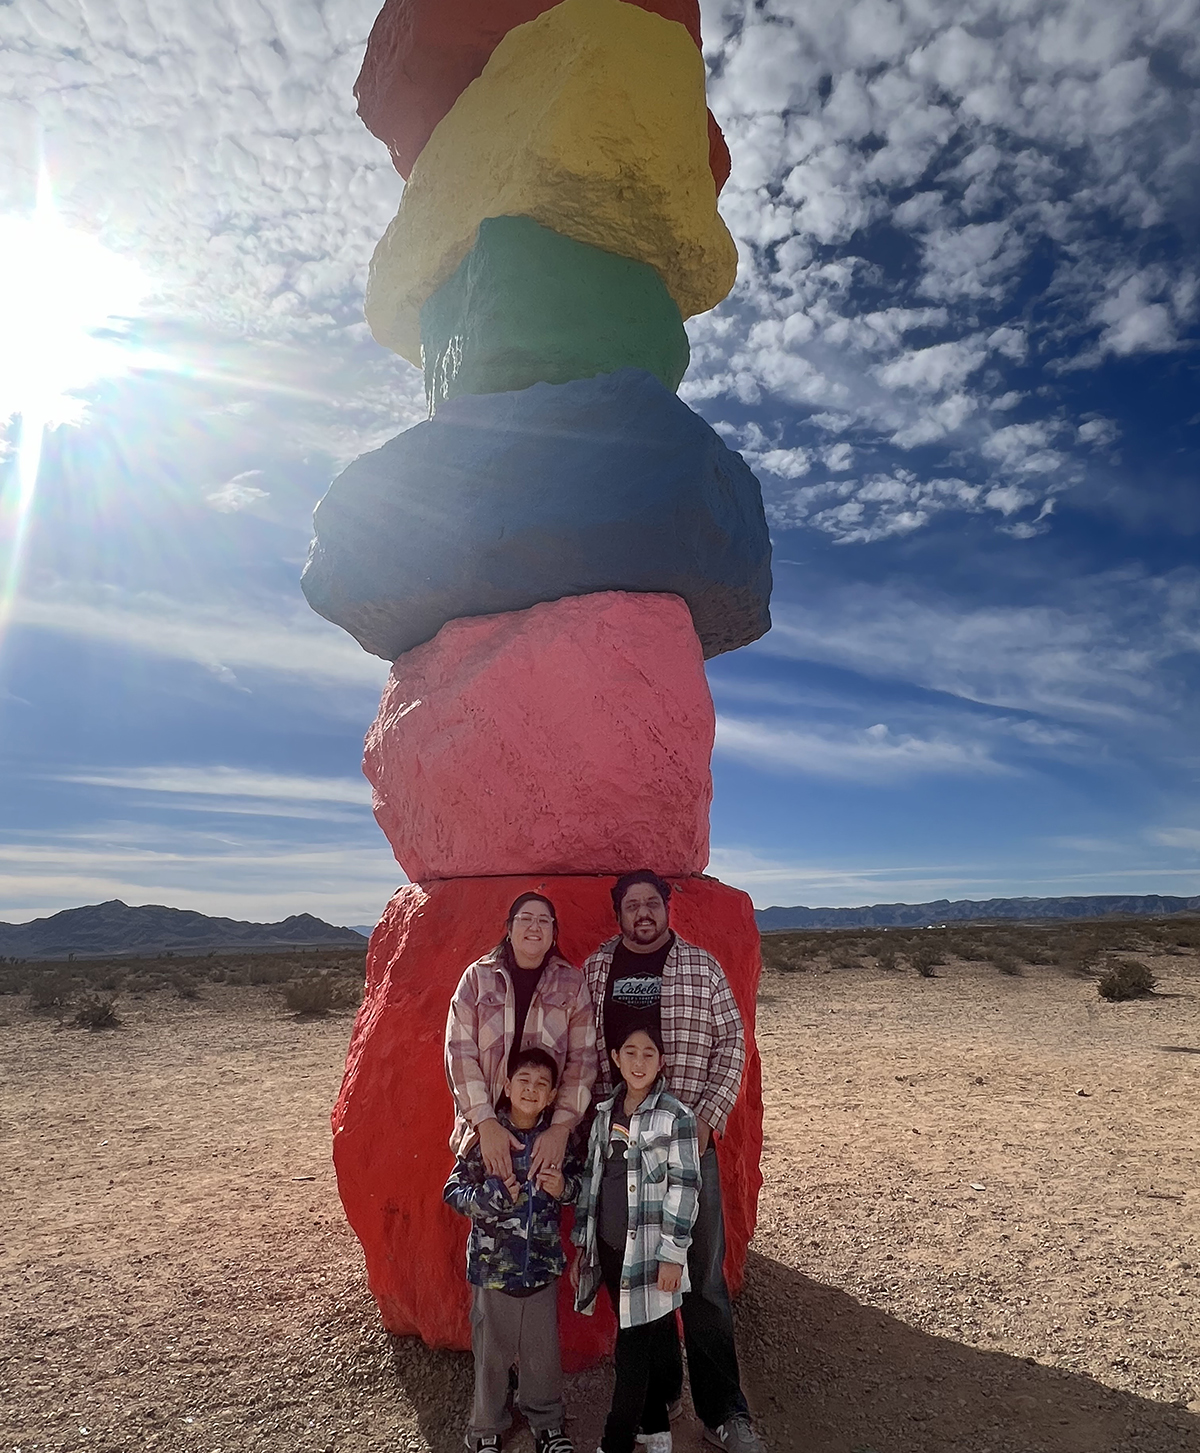 Michelle and her family standing in front of a colorful sculpture in t?2024-04-29